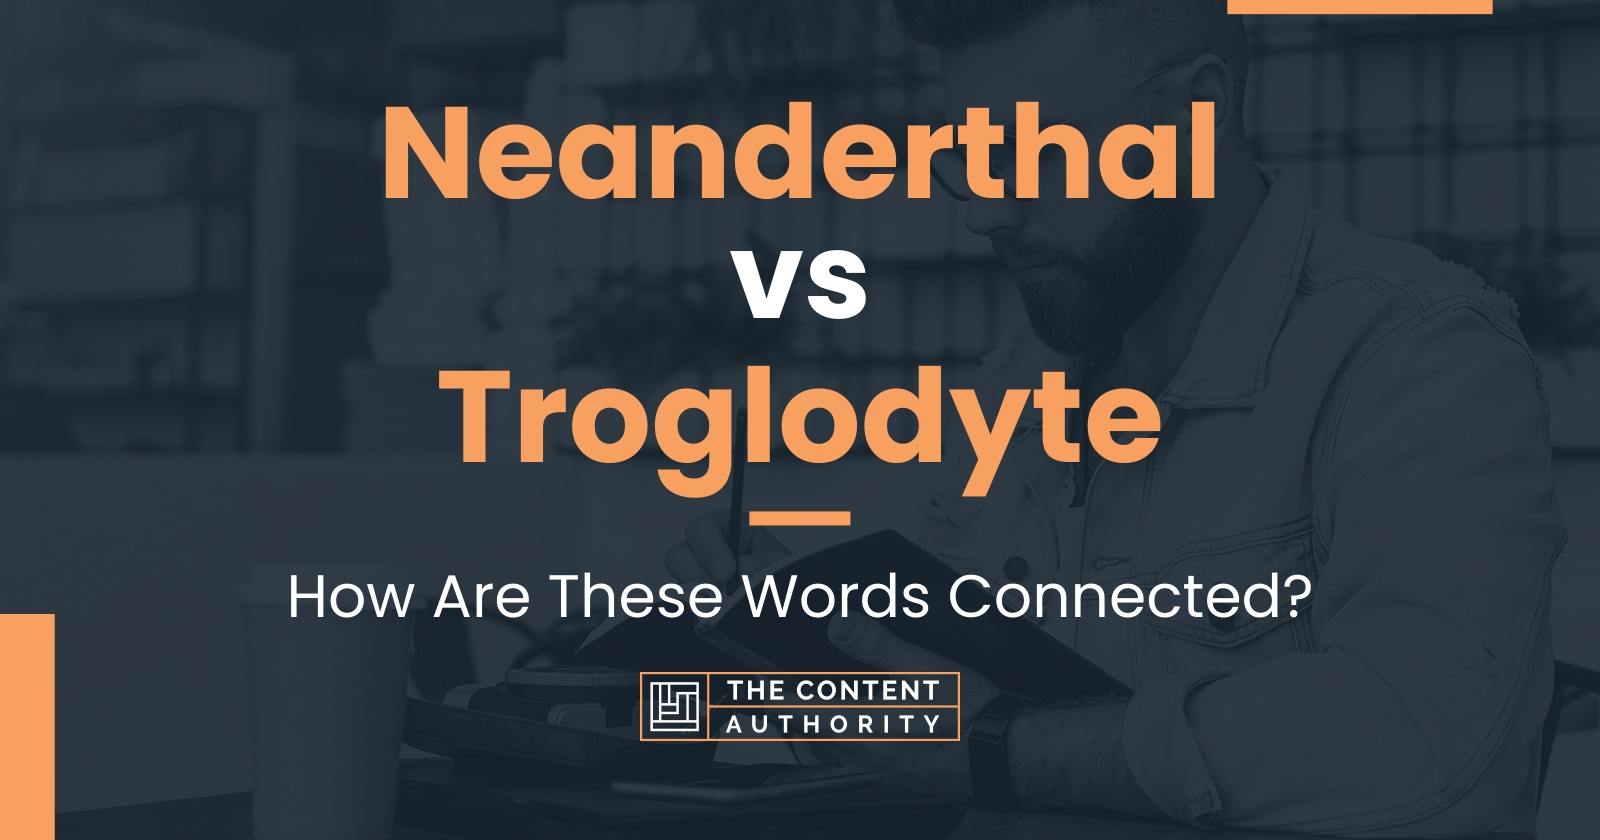 Neanderthal vs Troglodyte: How Are These Words Connected?